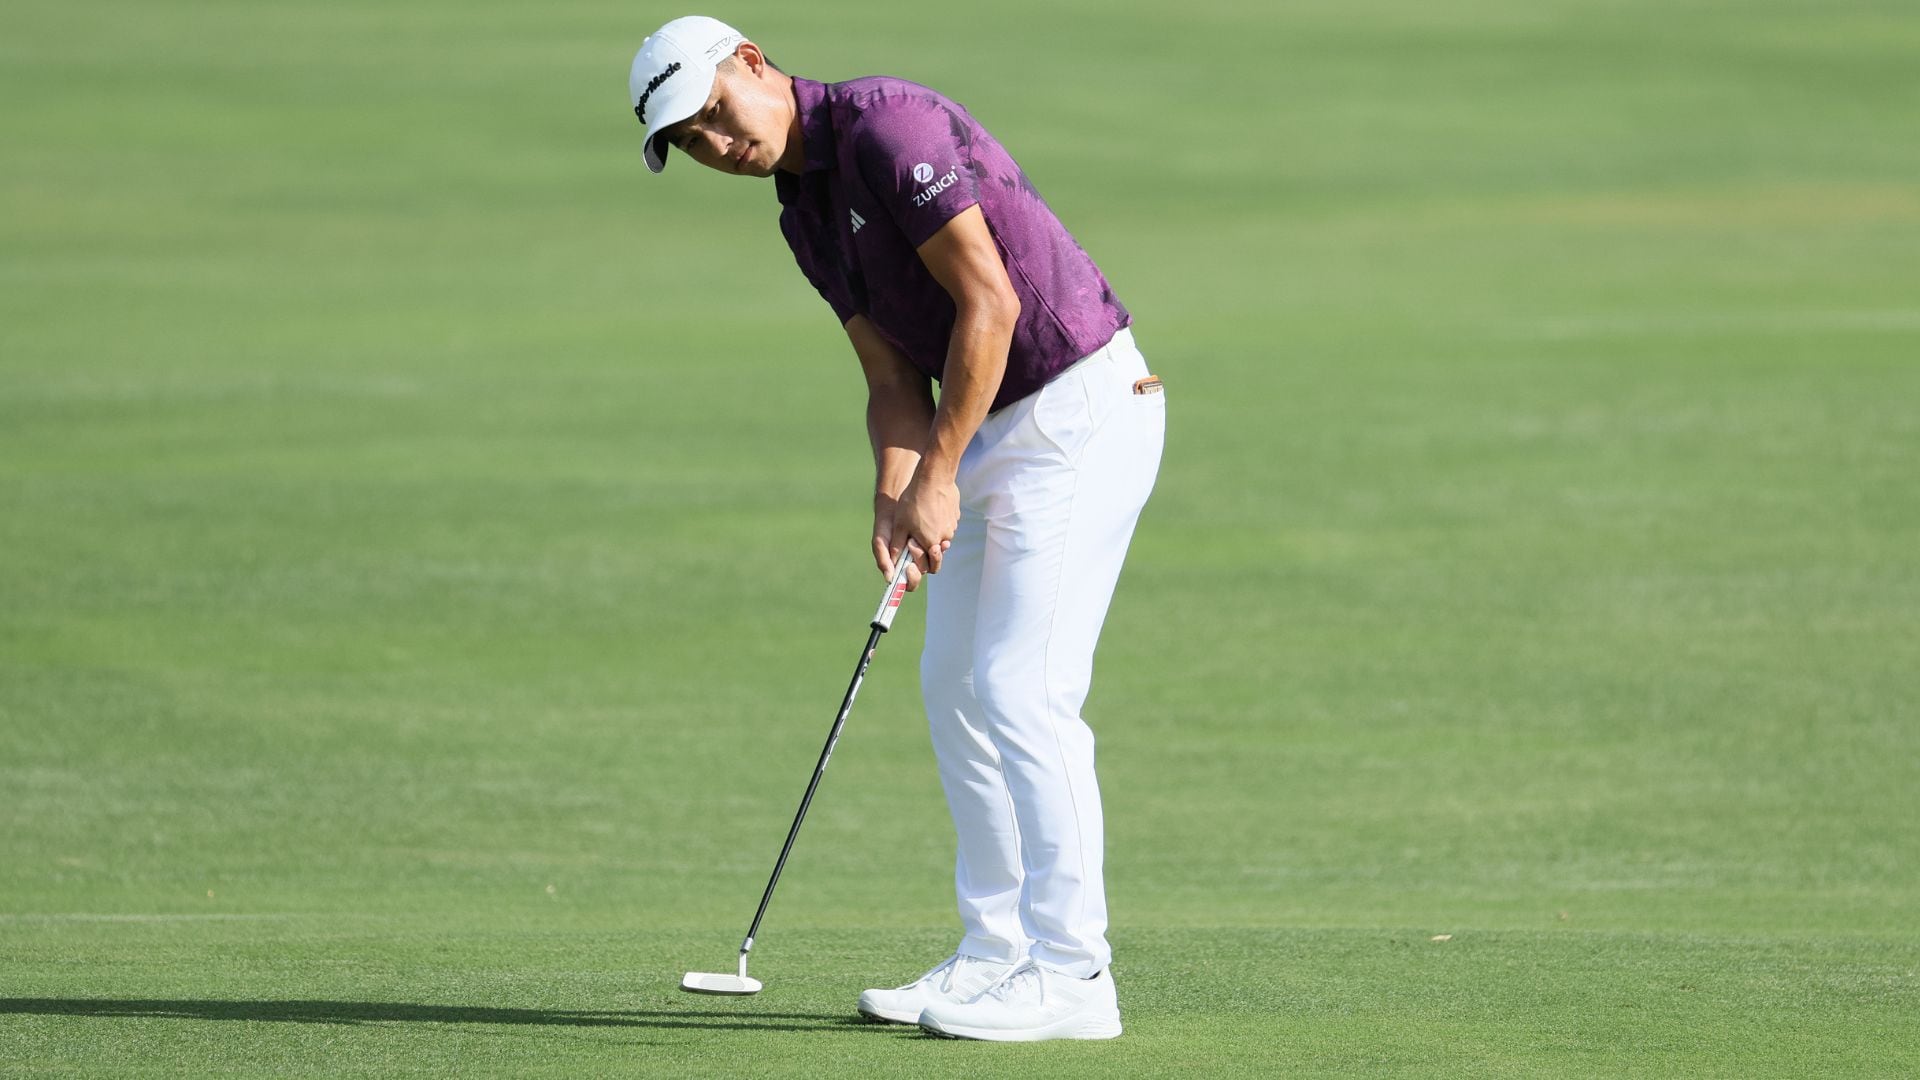 Six-shot leads have been lost before, but Collin Morikawa and his hot putter don’t plan on joining that list